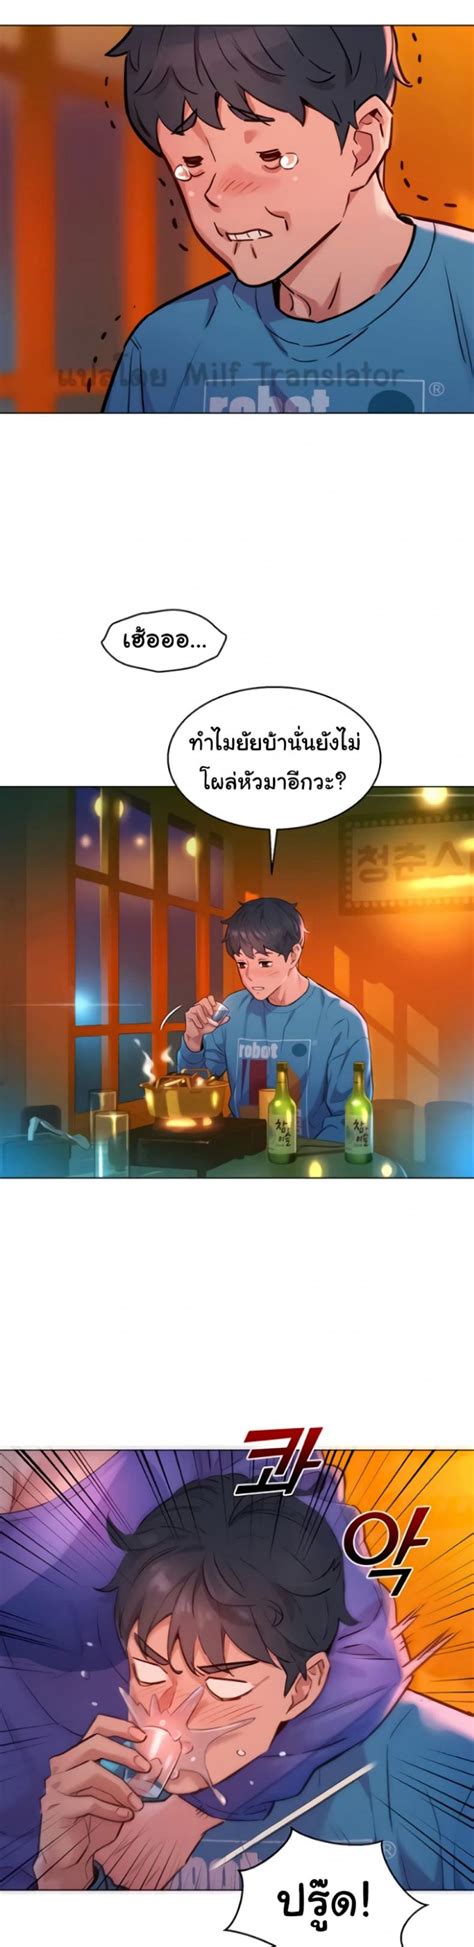 Lets Hang Out From Today 1 Manhwa Thai